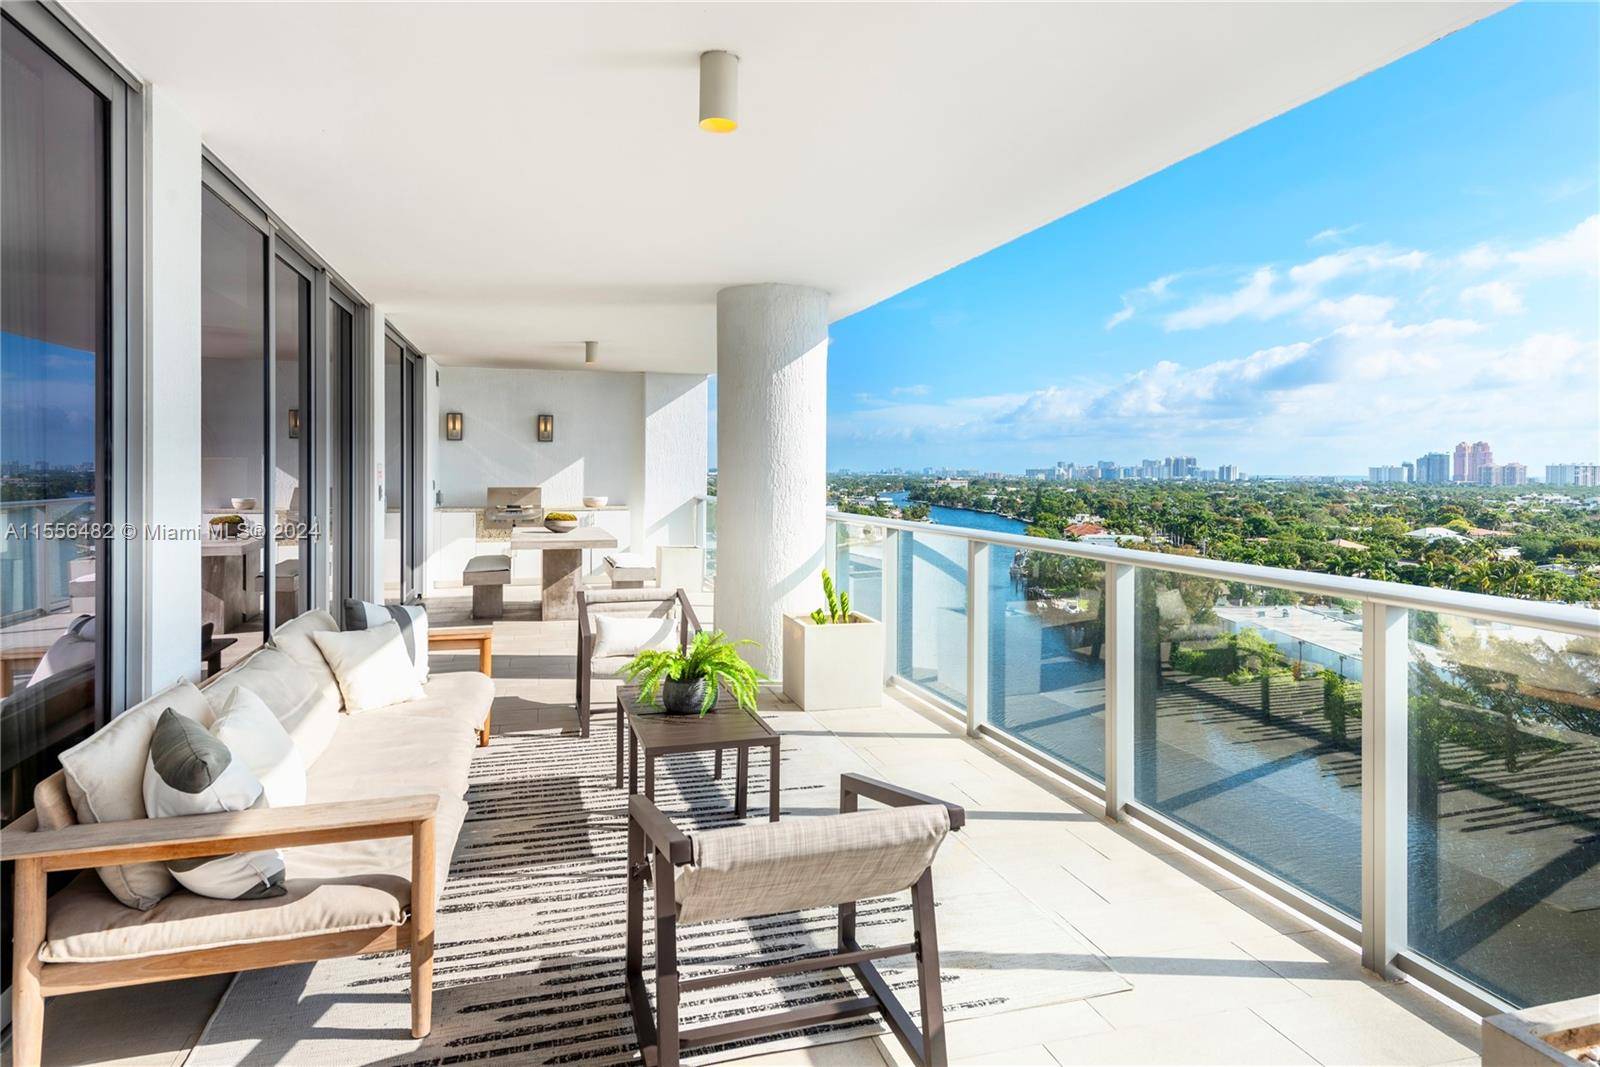 High Floor RIVA Residence Offers Stunning Ocean, Intracoastal, Park River Views from Every Room Private Terrace w Summer Kitchen for the Perfect Indoor Outdoor Lifestyle.